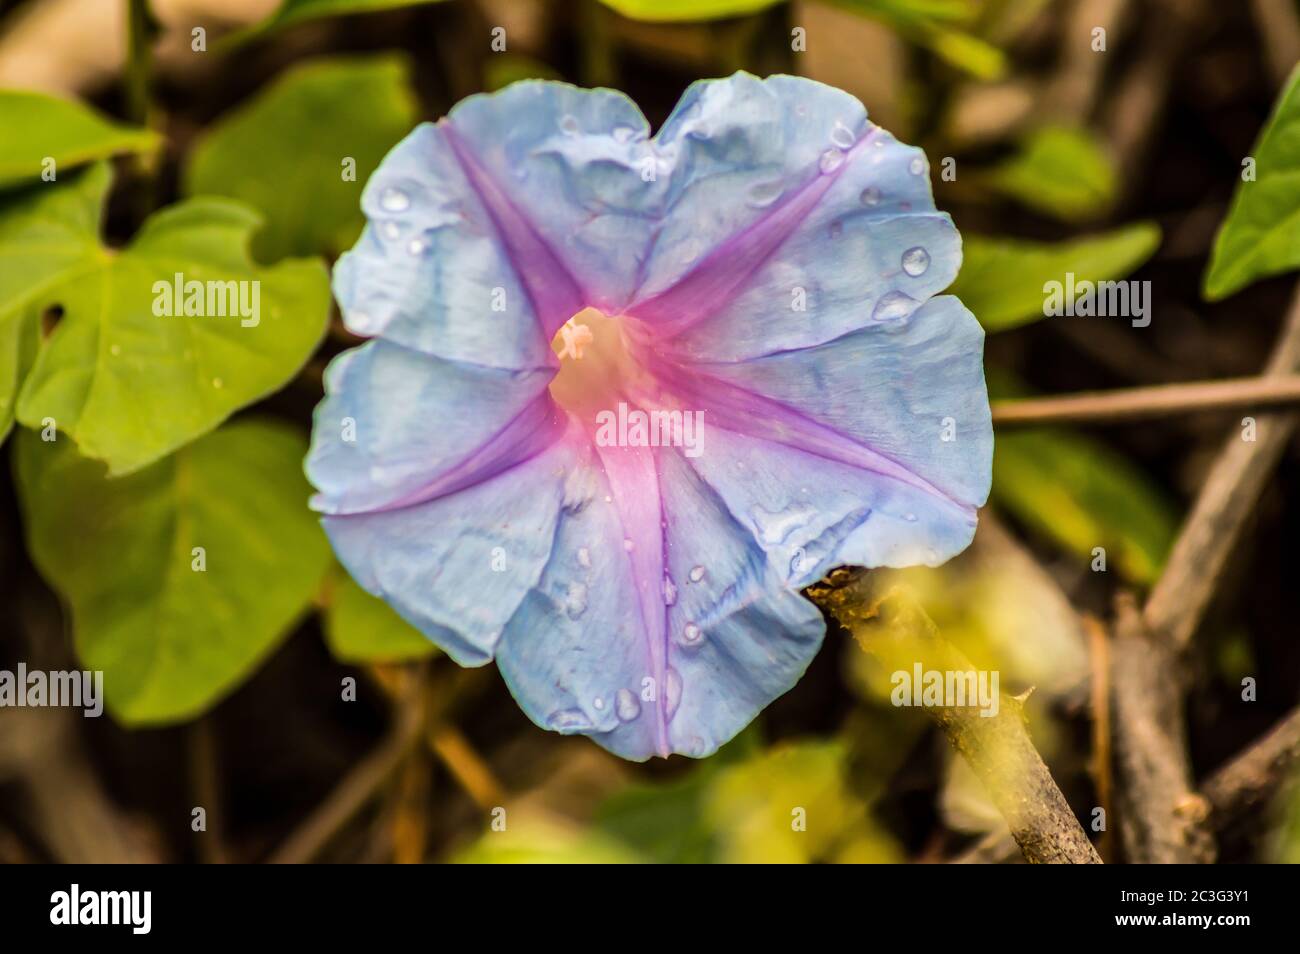 Ipomoea alba, also called moon flower due to its nocturnal flowering, Stock Photo